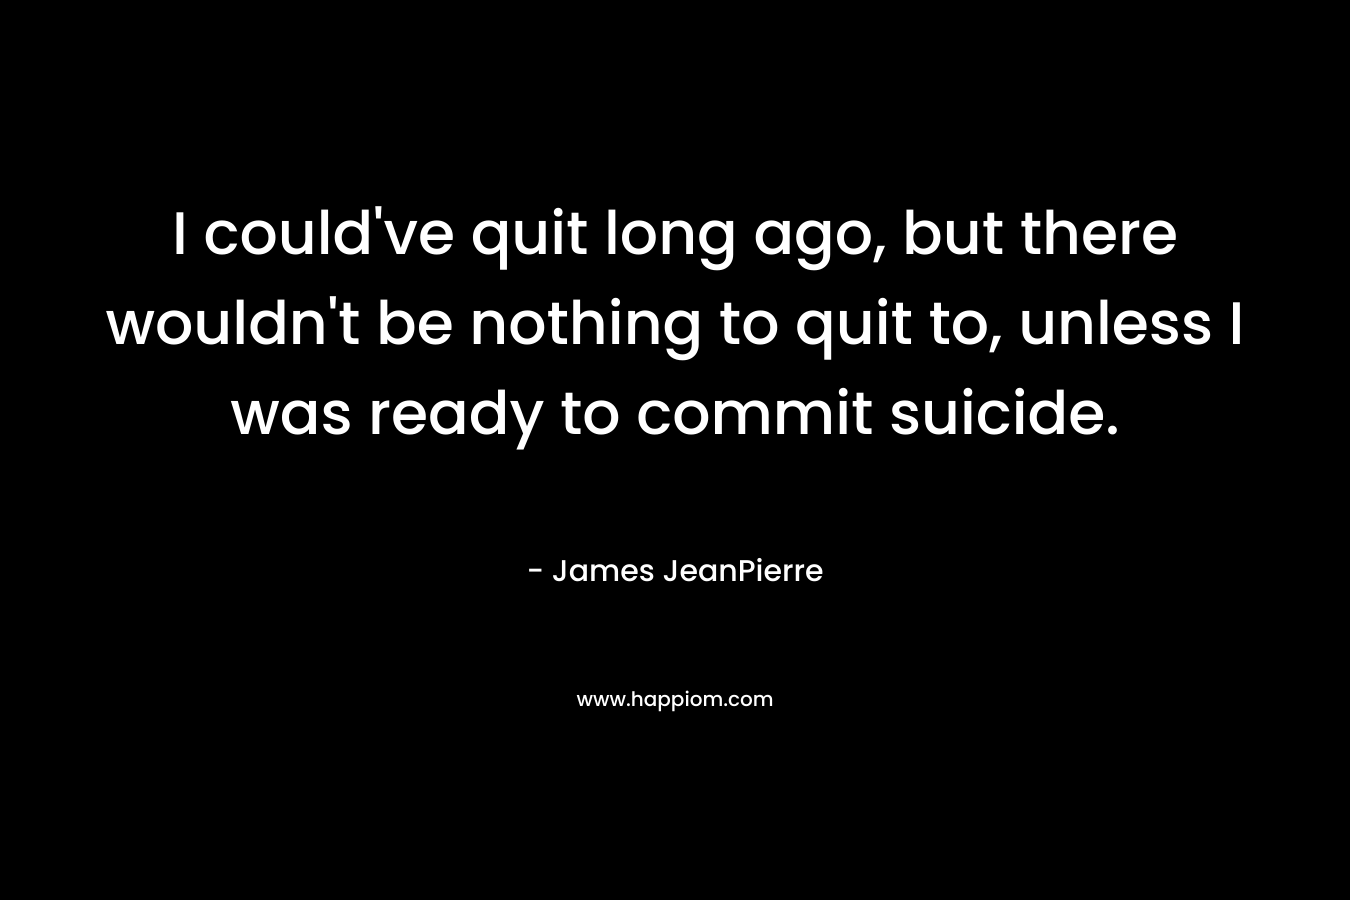 I could’ve quit long ago, but there wouldn’t be nothing to quit to, unless I was ready to commit suicide. – James JeanPierre